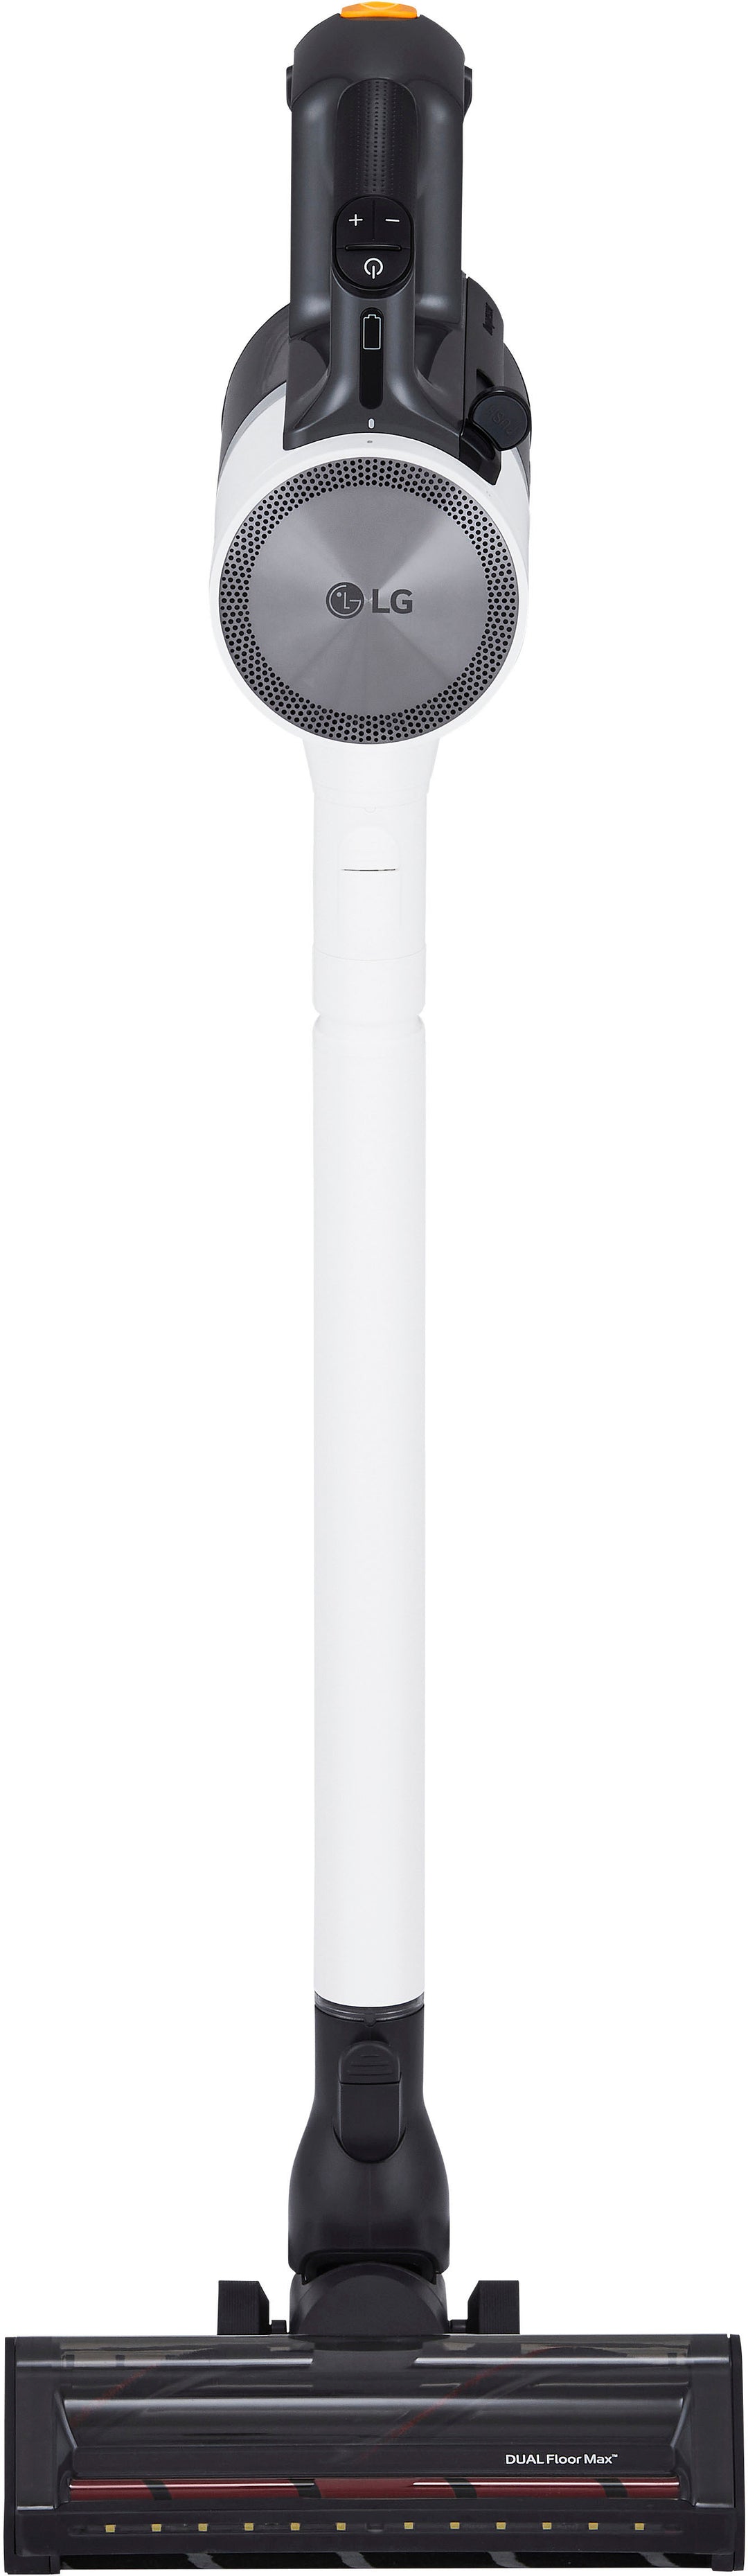 LG - CordZero Cordless Stick Vacuum with All-in-One Tower - Essence White_16